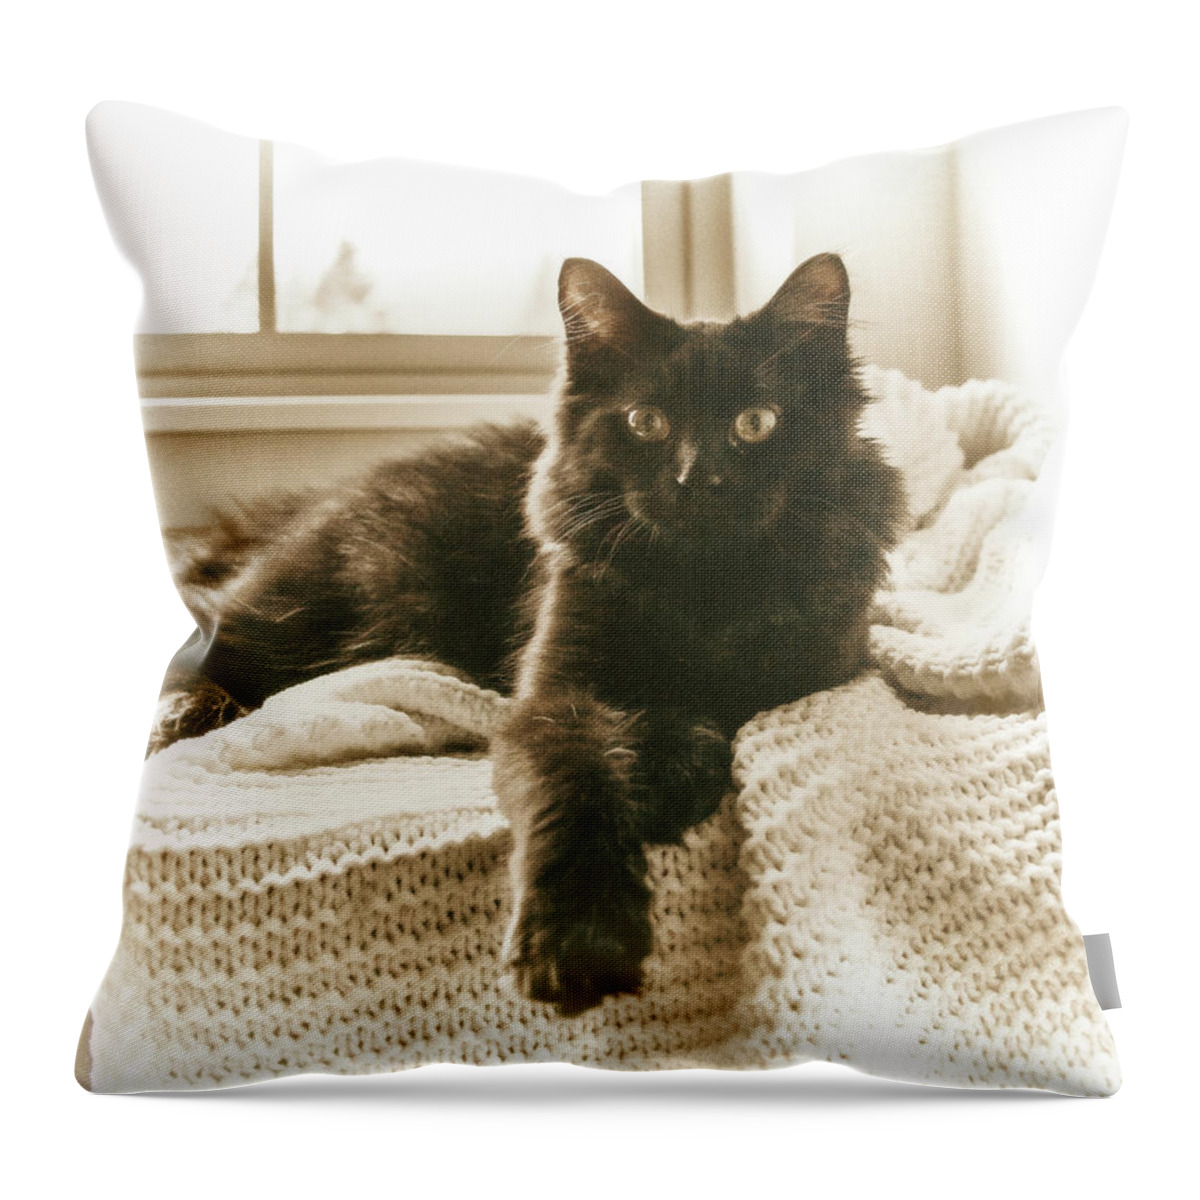 Kitty Throw Pillow featuring the digital art Kitty on a Knit Blanket by Cindy Collier Harris